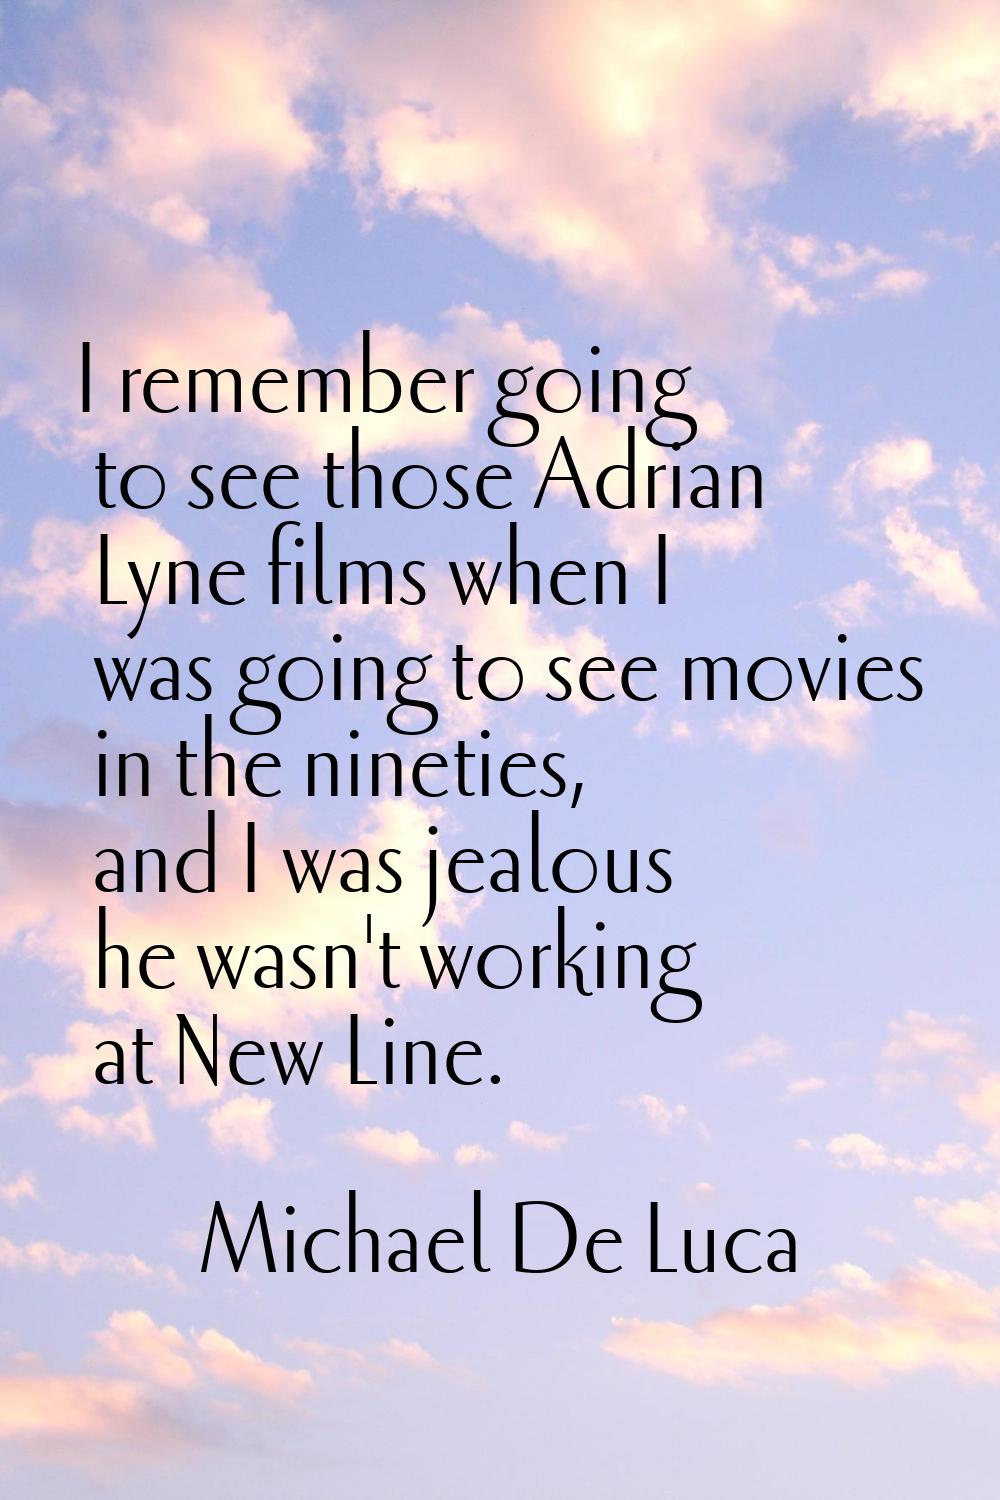 I remember going to see those Adrian Lyne films when I was going to see movies in the nineties, and